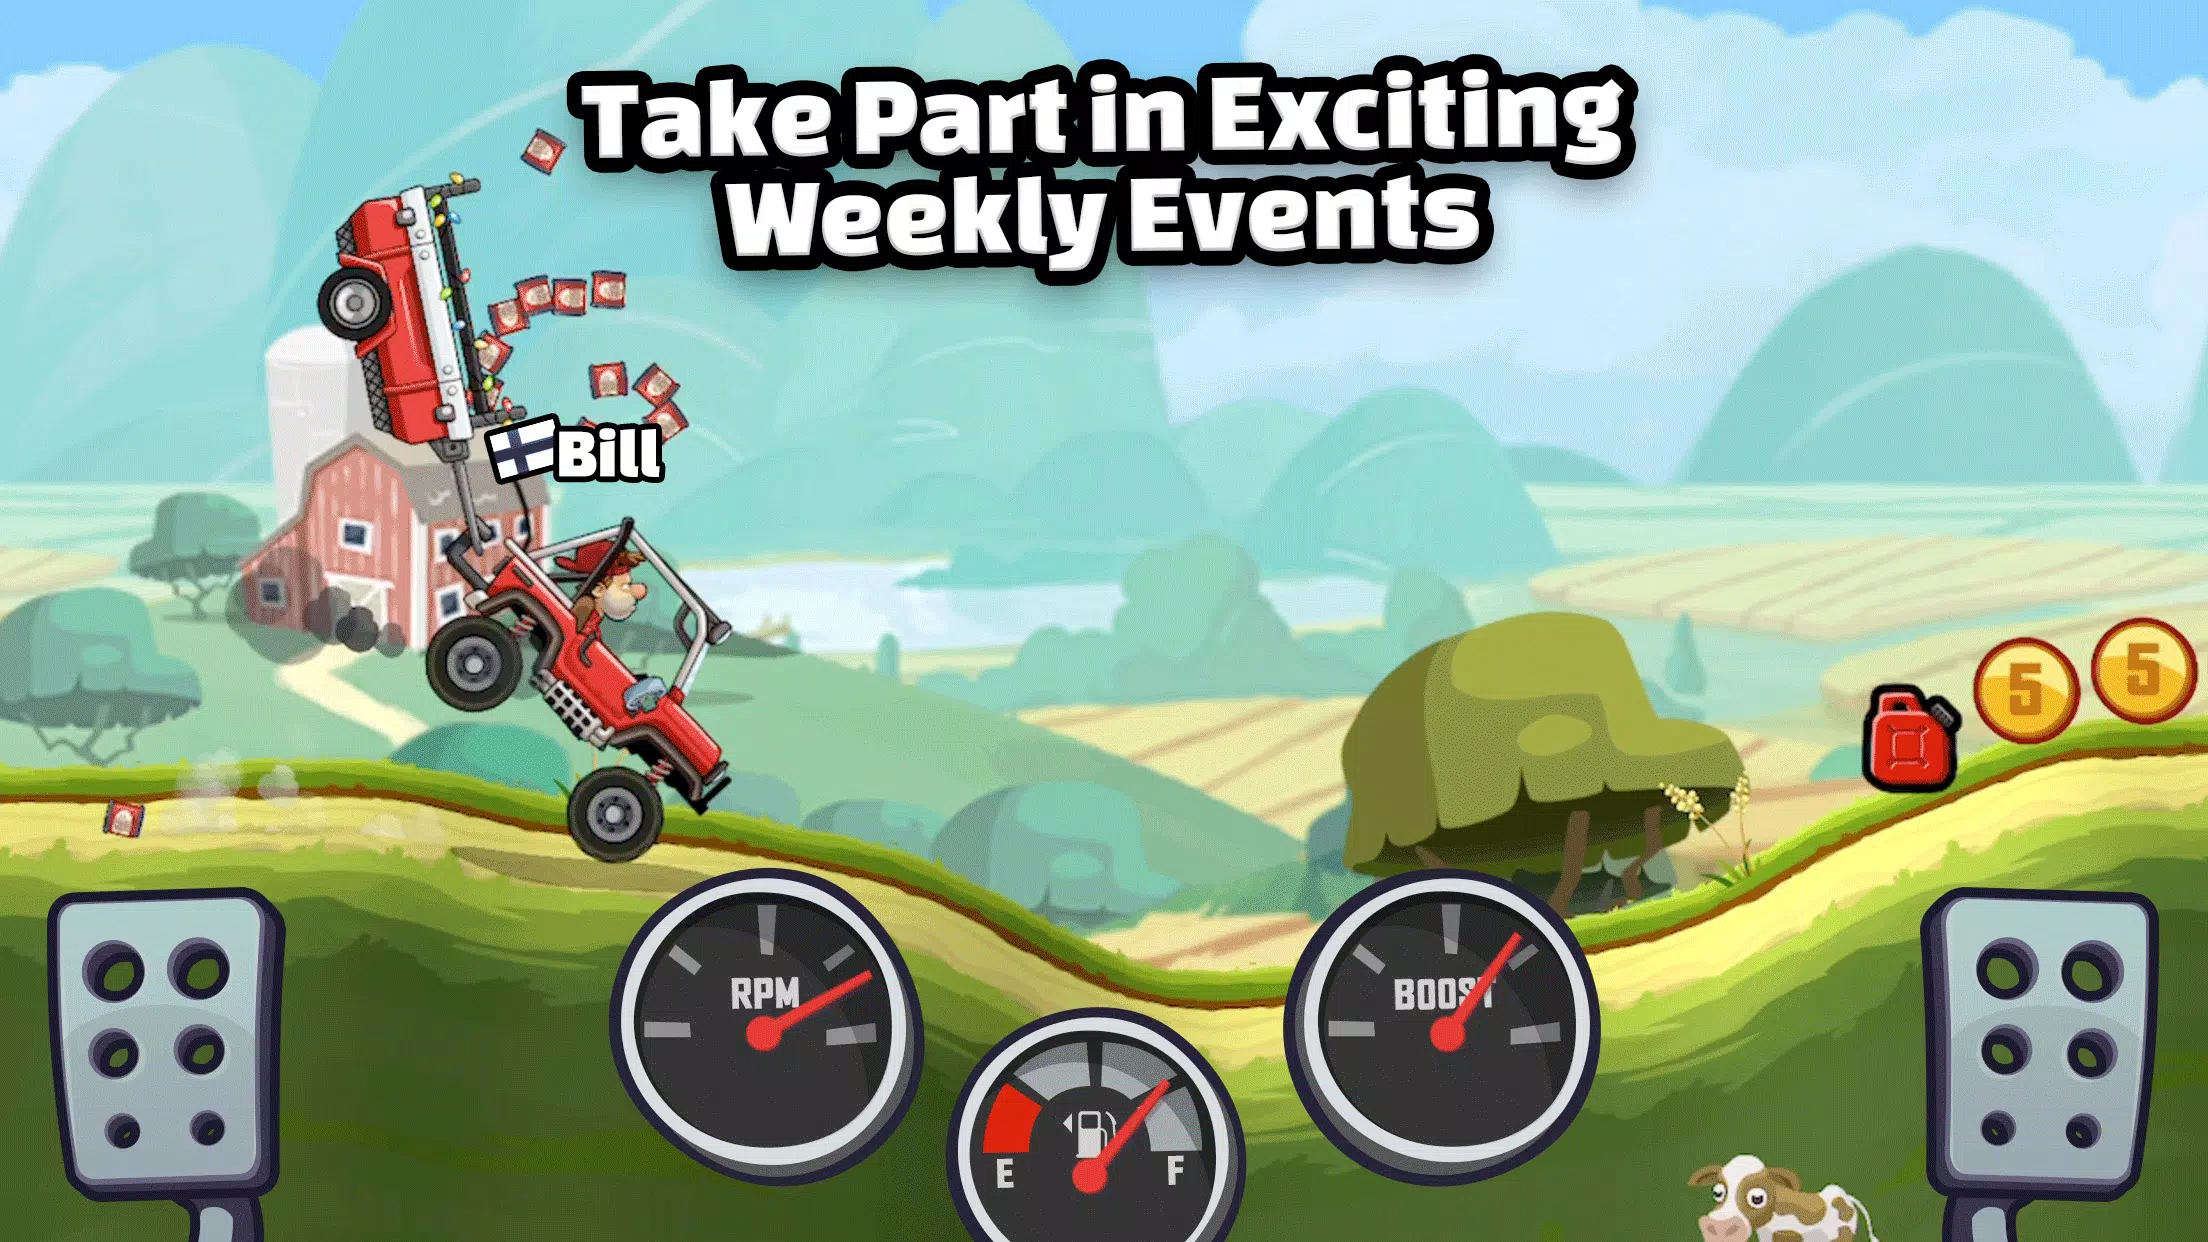 Download Hill Climb Racing 2 1.22.1 APK For Android